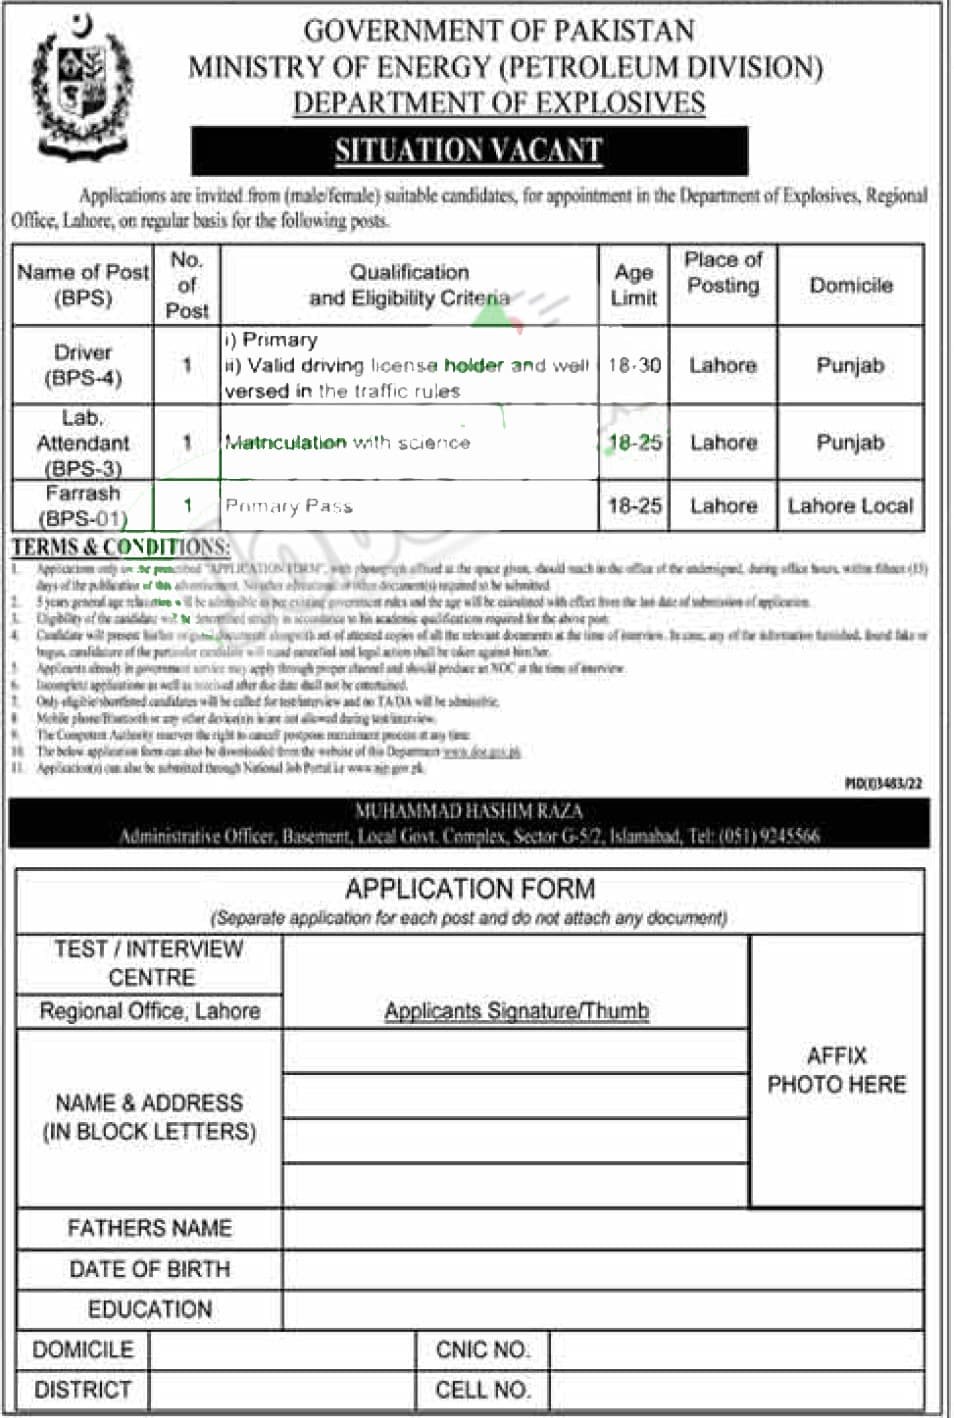 Ministry of Energy Department of Explosives Government of Pakistan jobs 2022 